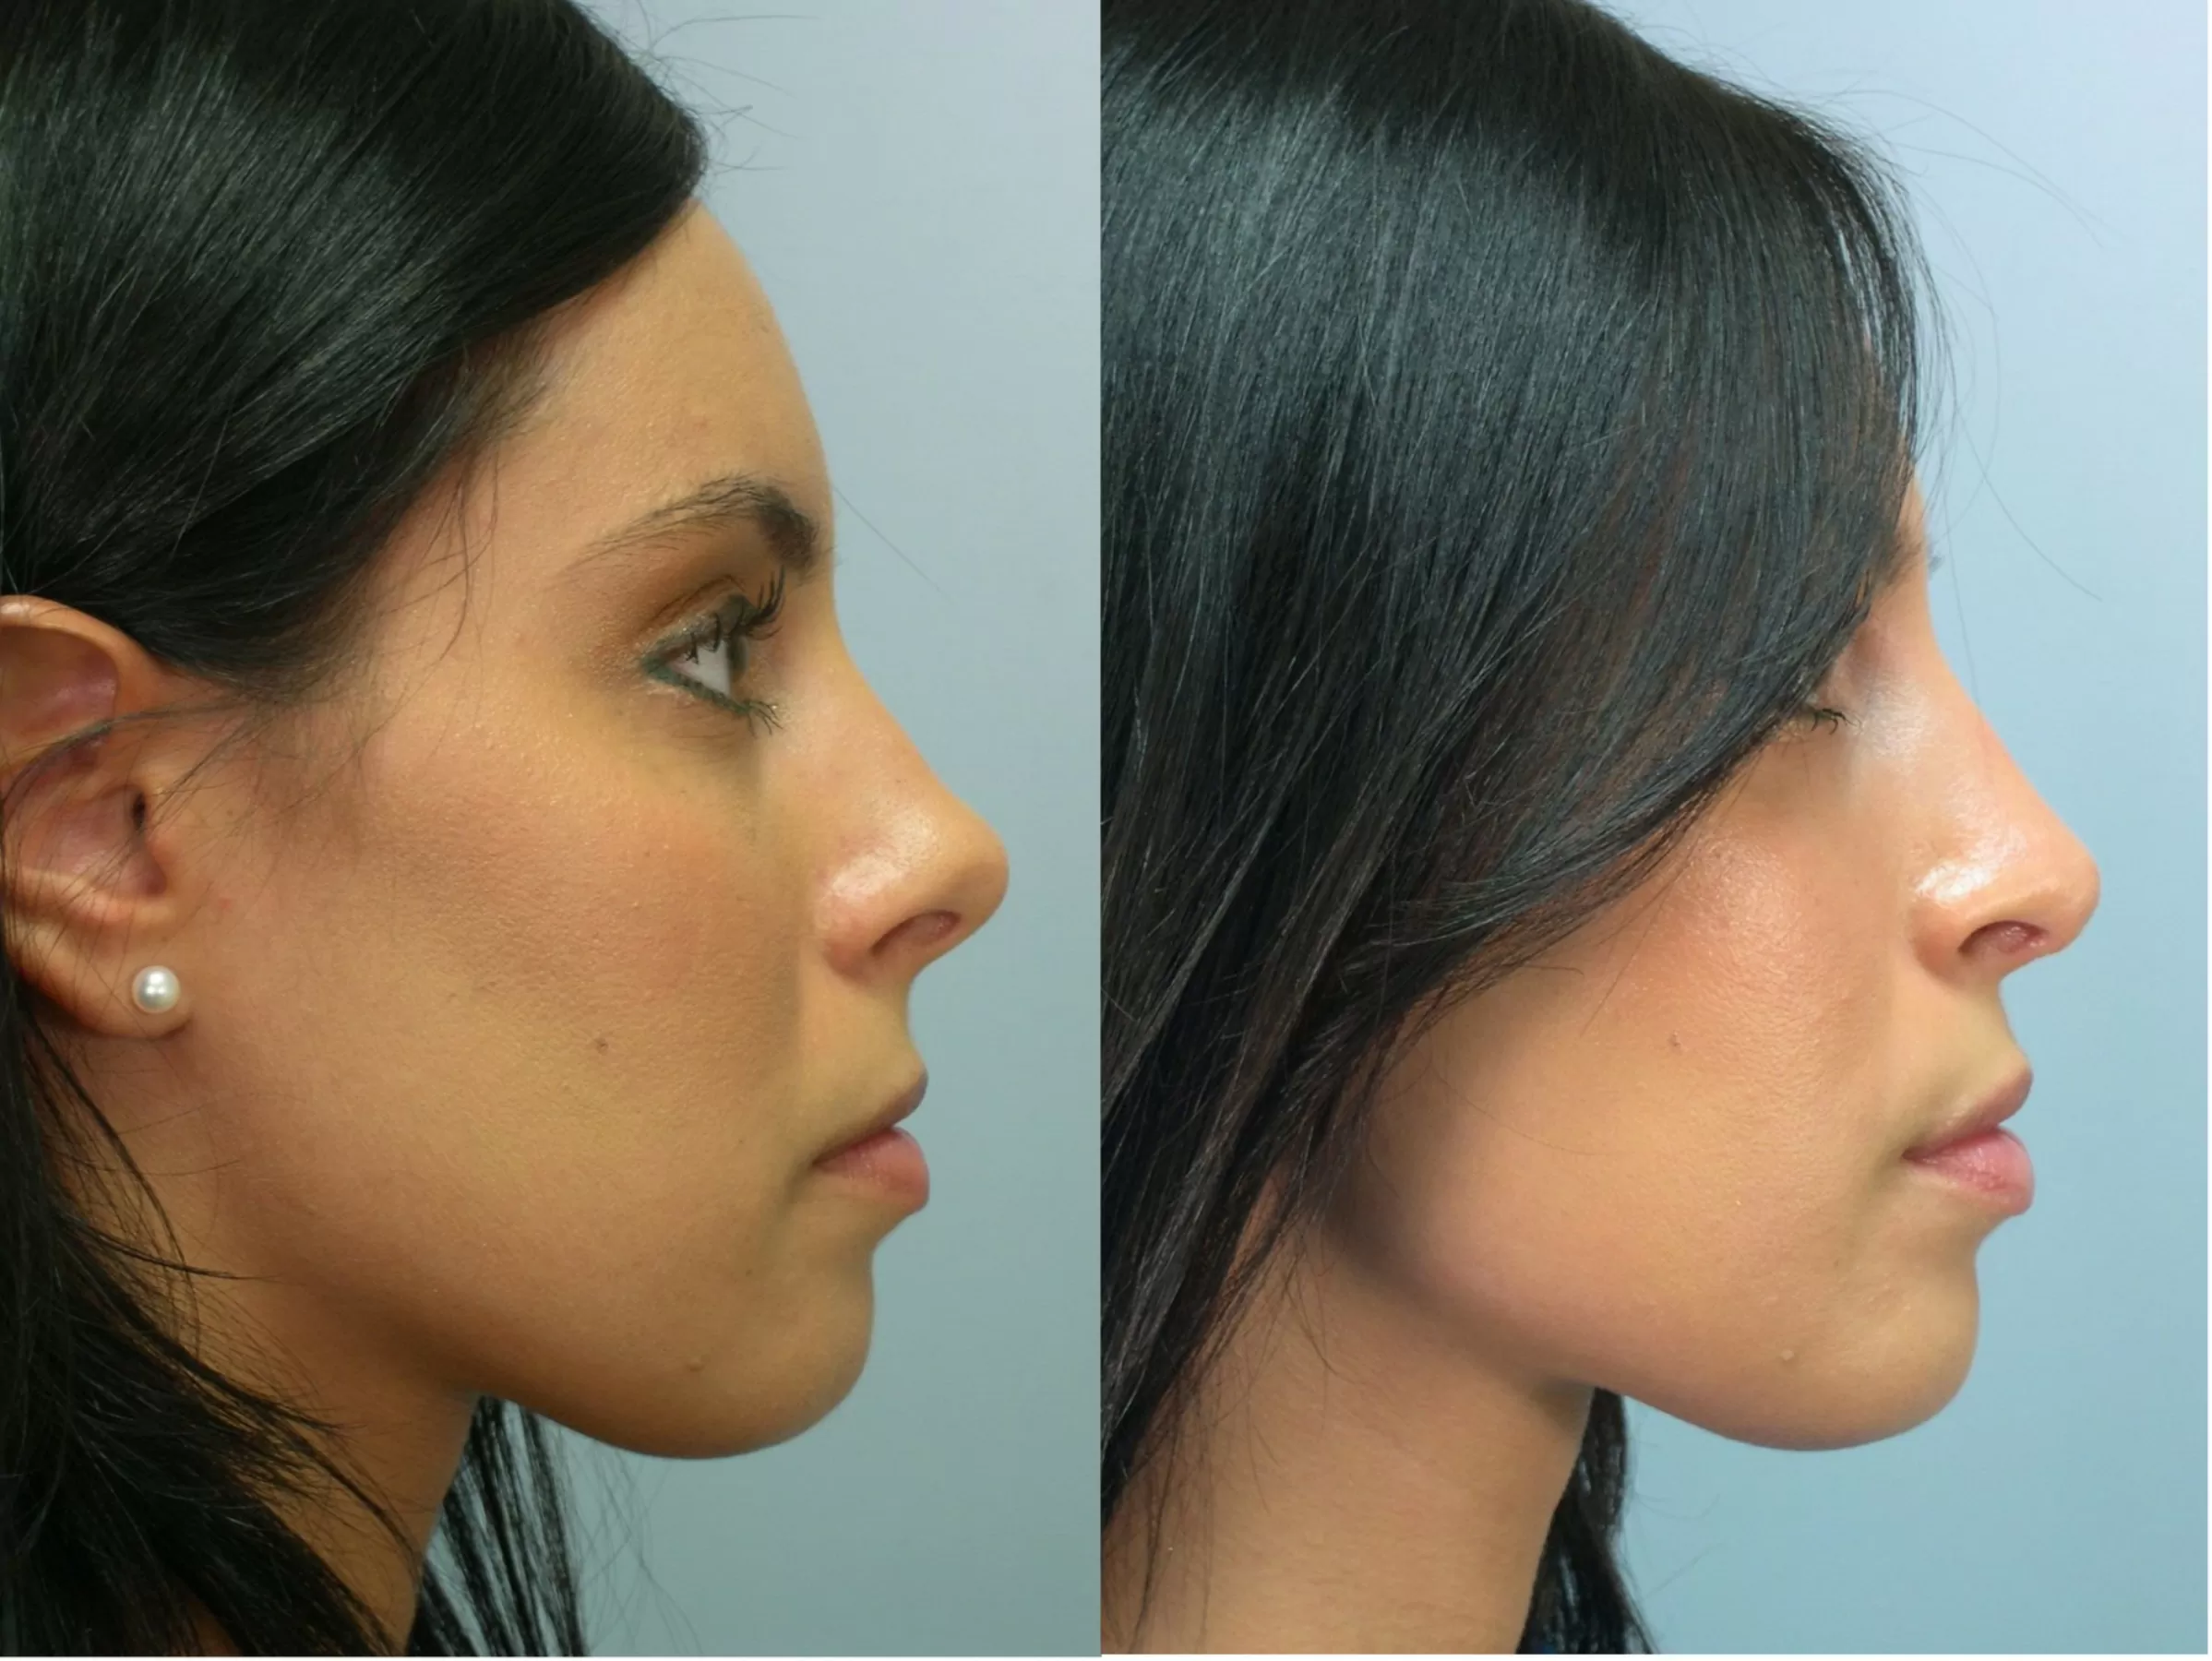 Does medical insurance cover the rhinoplasty procedure